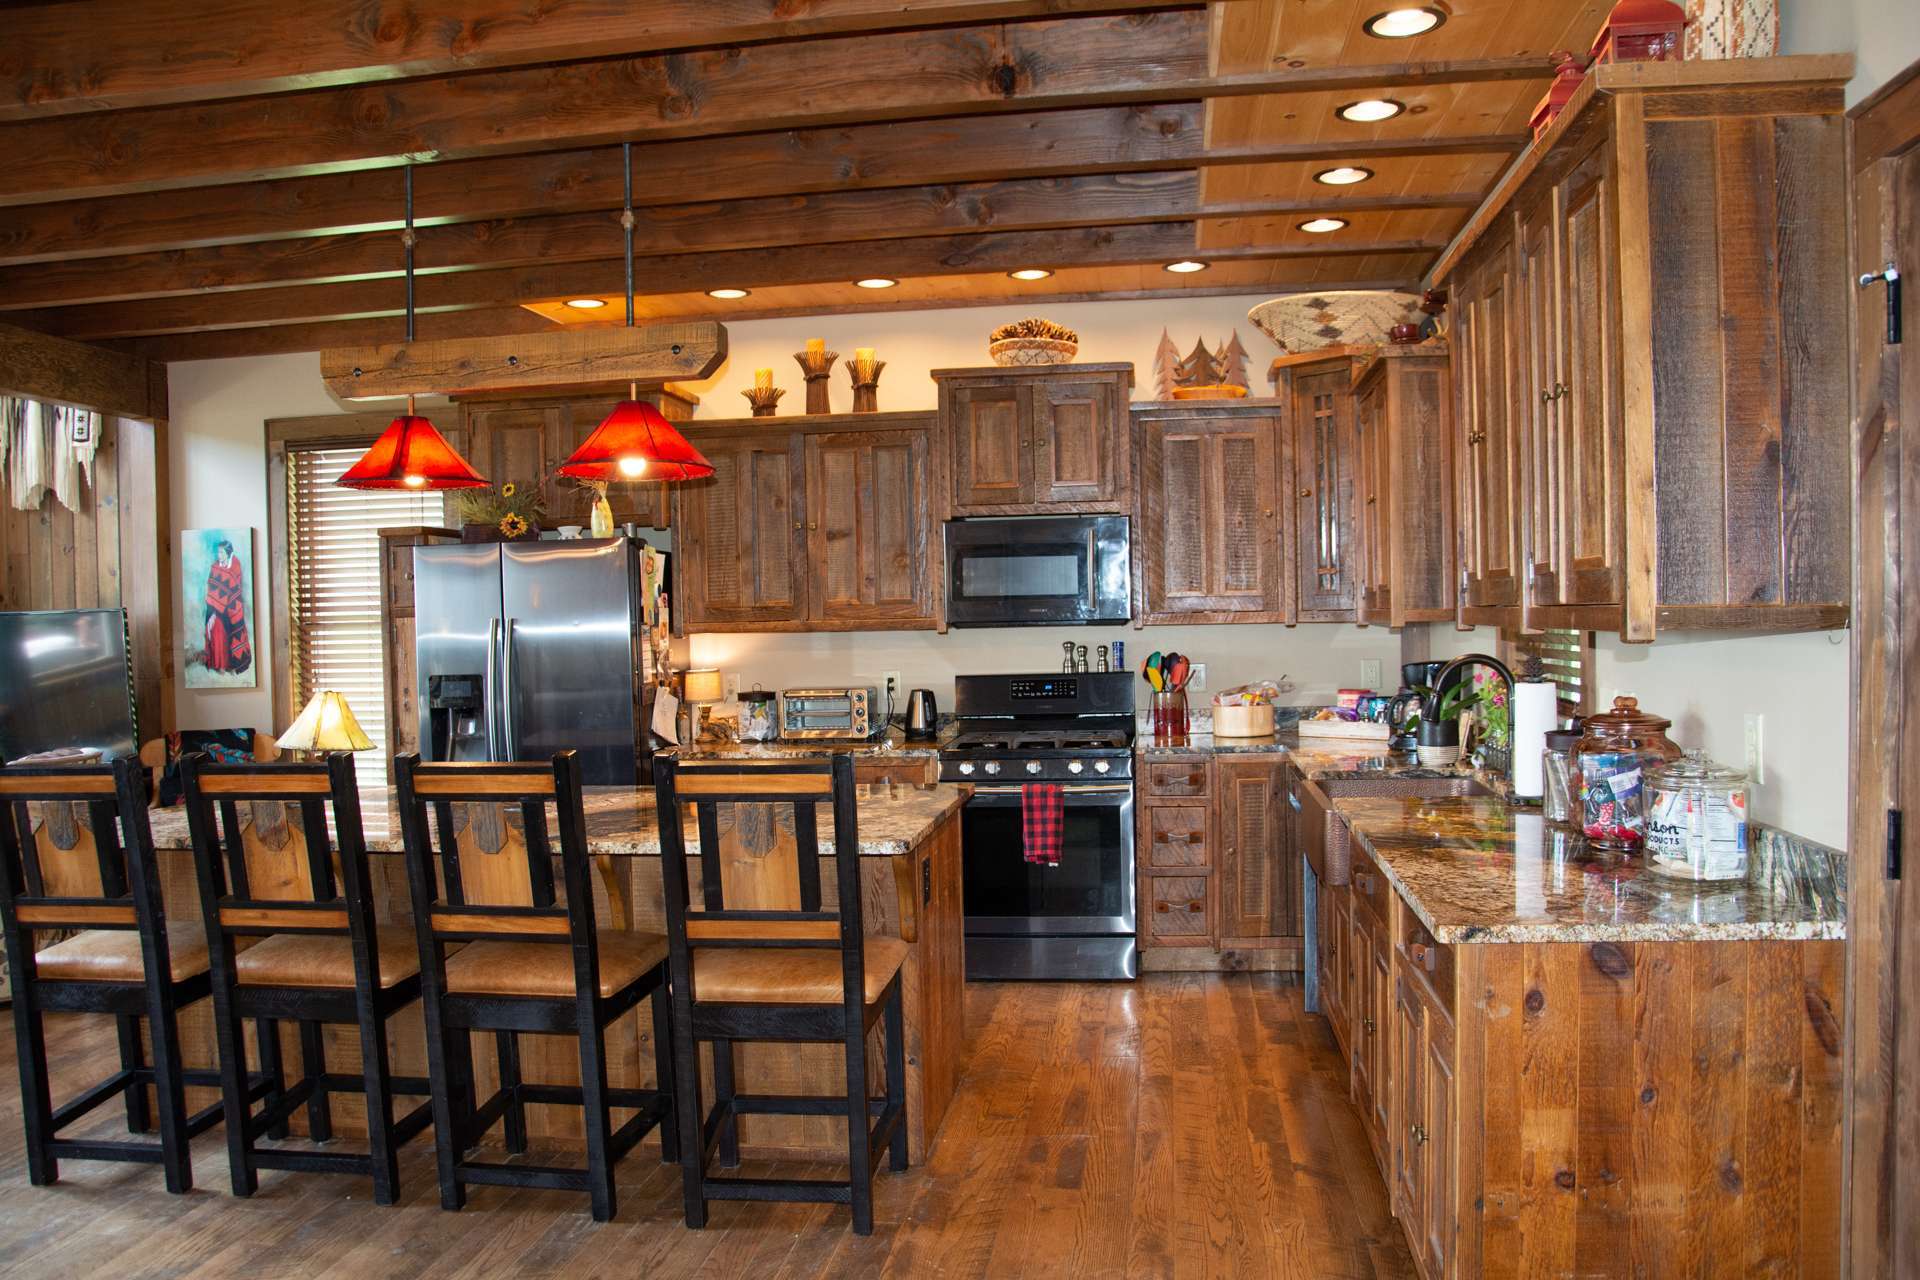 You are enveloped in modern luxury amid natural beauty and rustic details such as the exposed beams, reclaimed barn wood cabinetry, granite counter tops, hammered copper apron sink, gas range, and large island with bar seating in the kitchen.